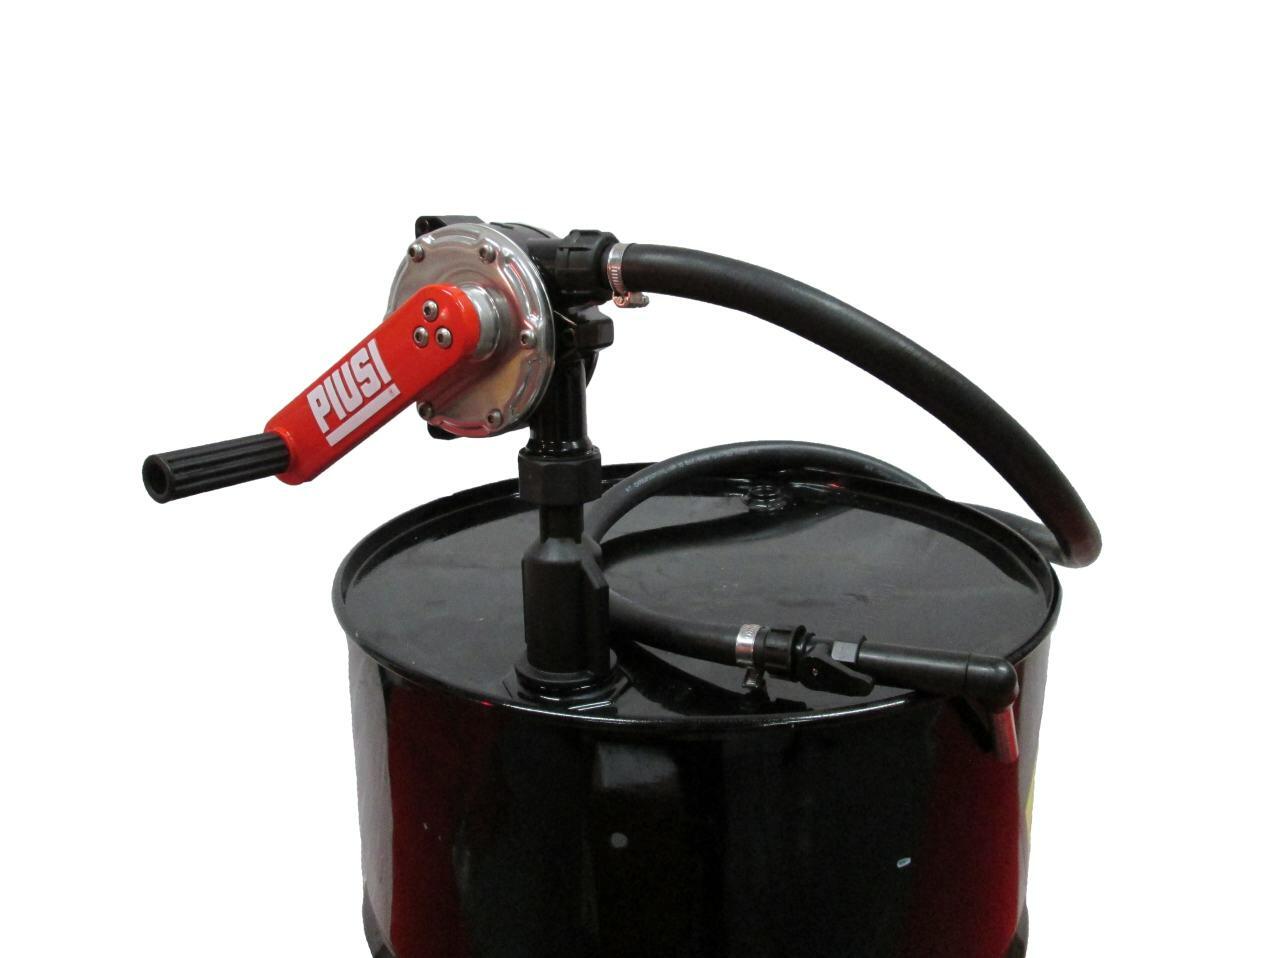 Piusi - Stainless Steel Rotary Hand Fuel Transfer Pump